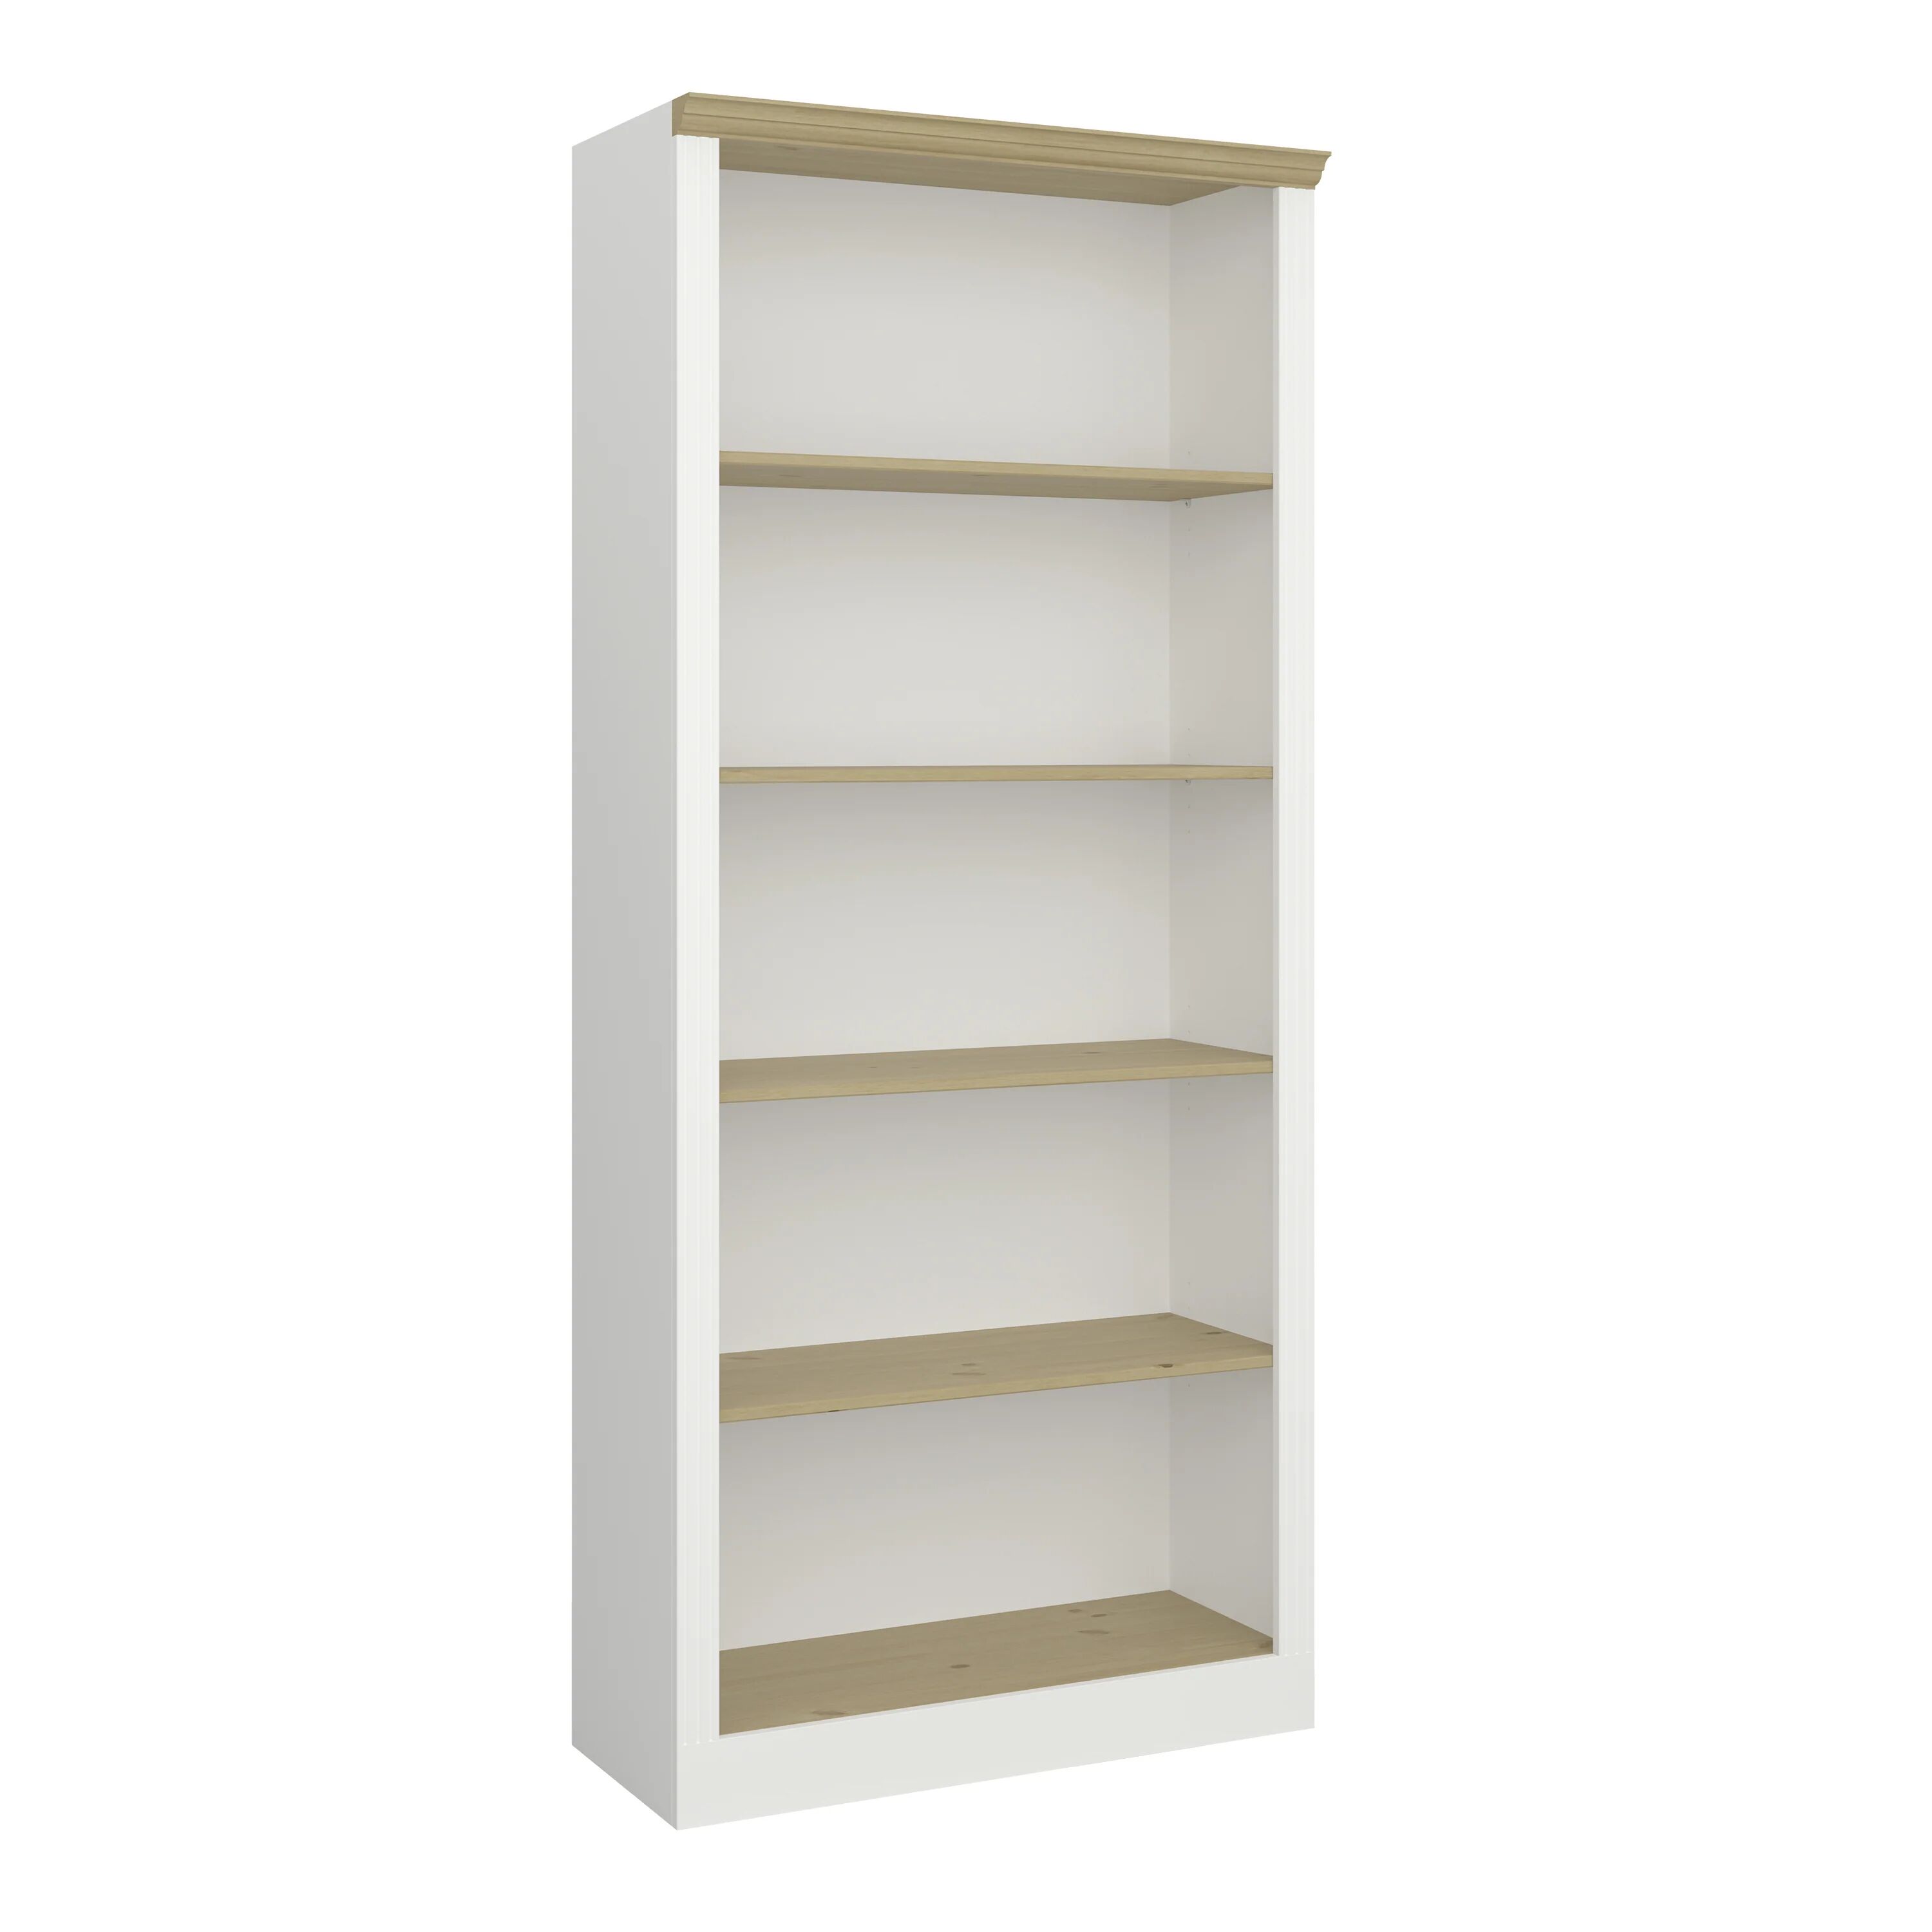 Furniture To Go Nola 4 Shelf Bookcase - Available In 2 Colours